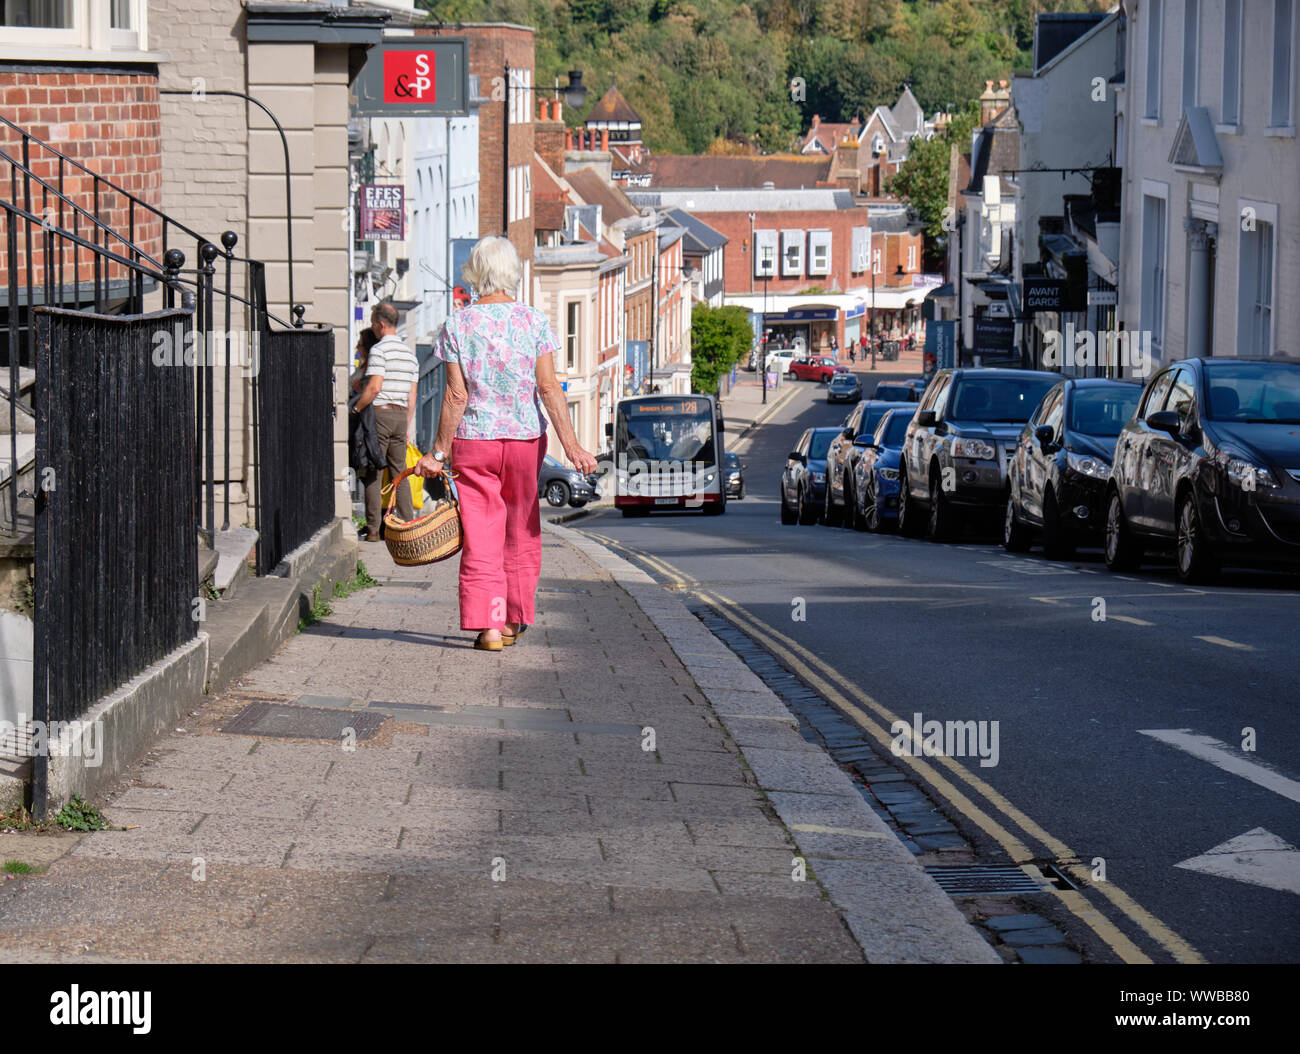 Woman with a basket walking downhill High Street, Lewes towards to city center, while bus heads to other way. Lewes, UK, September 2019 Stock Photo